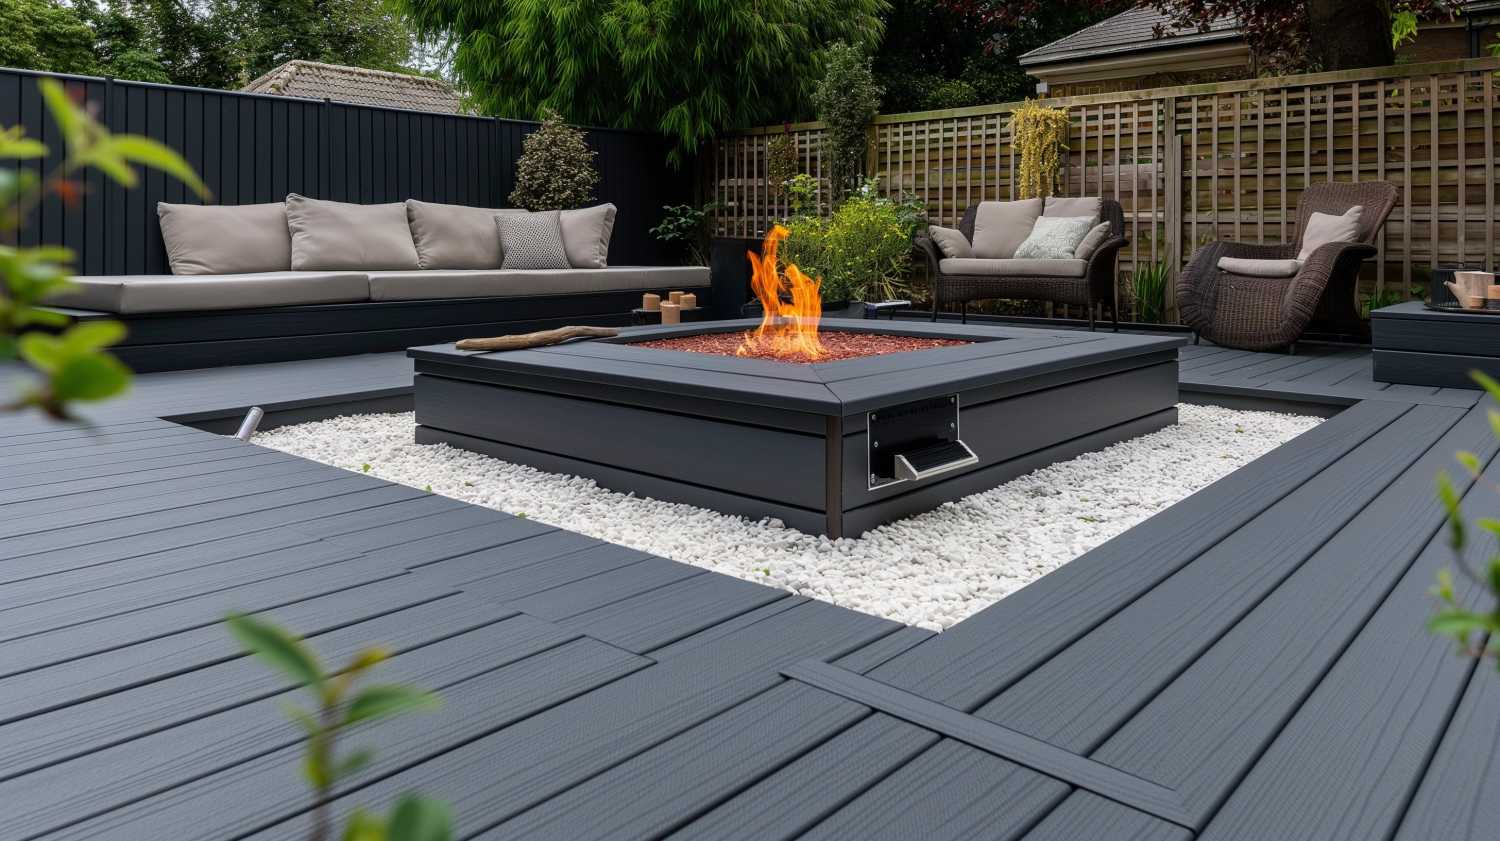 The Advantages of PVC Decking for Your Outdoor Space